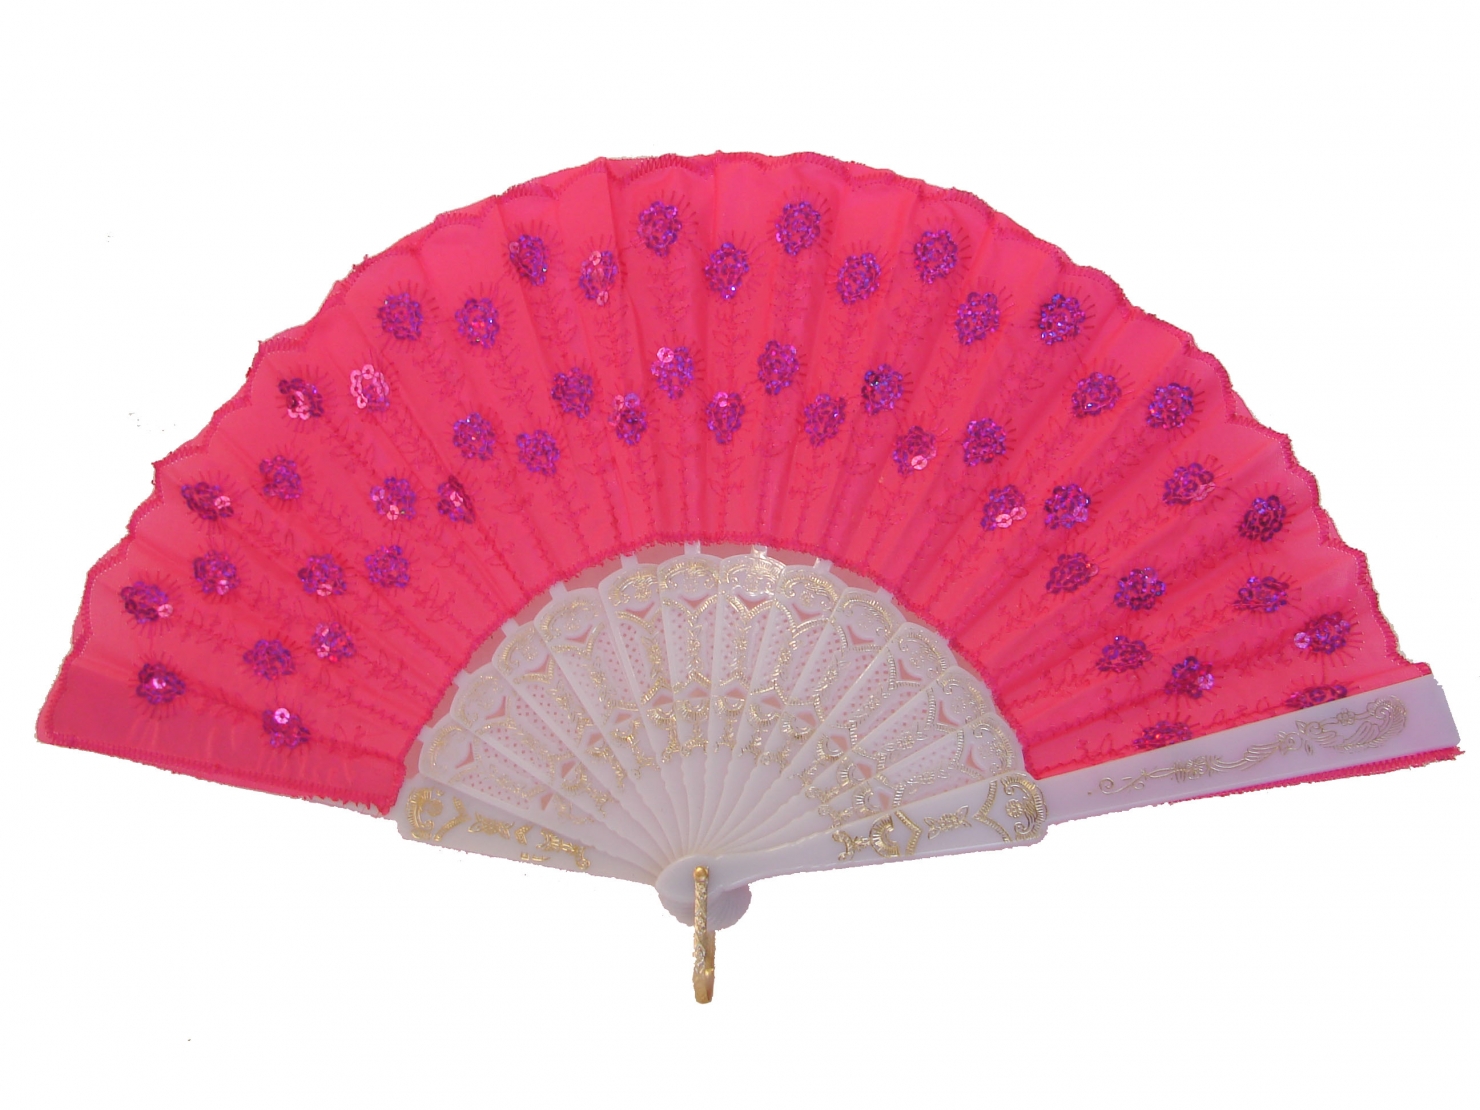 Peacock Pattern Sequin Fabric Hand Fan in Different Colors